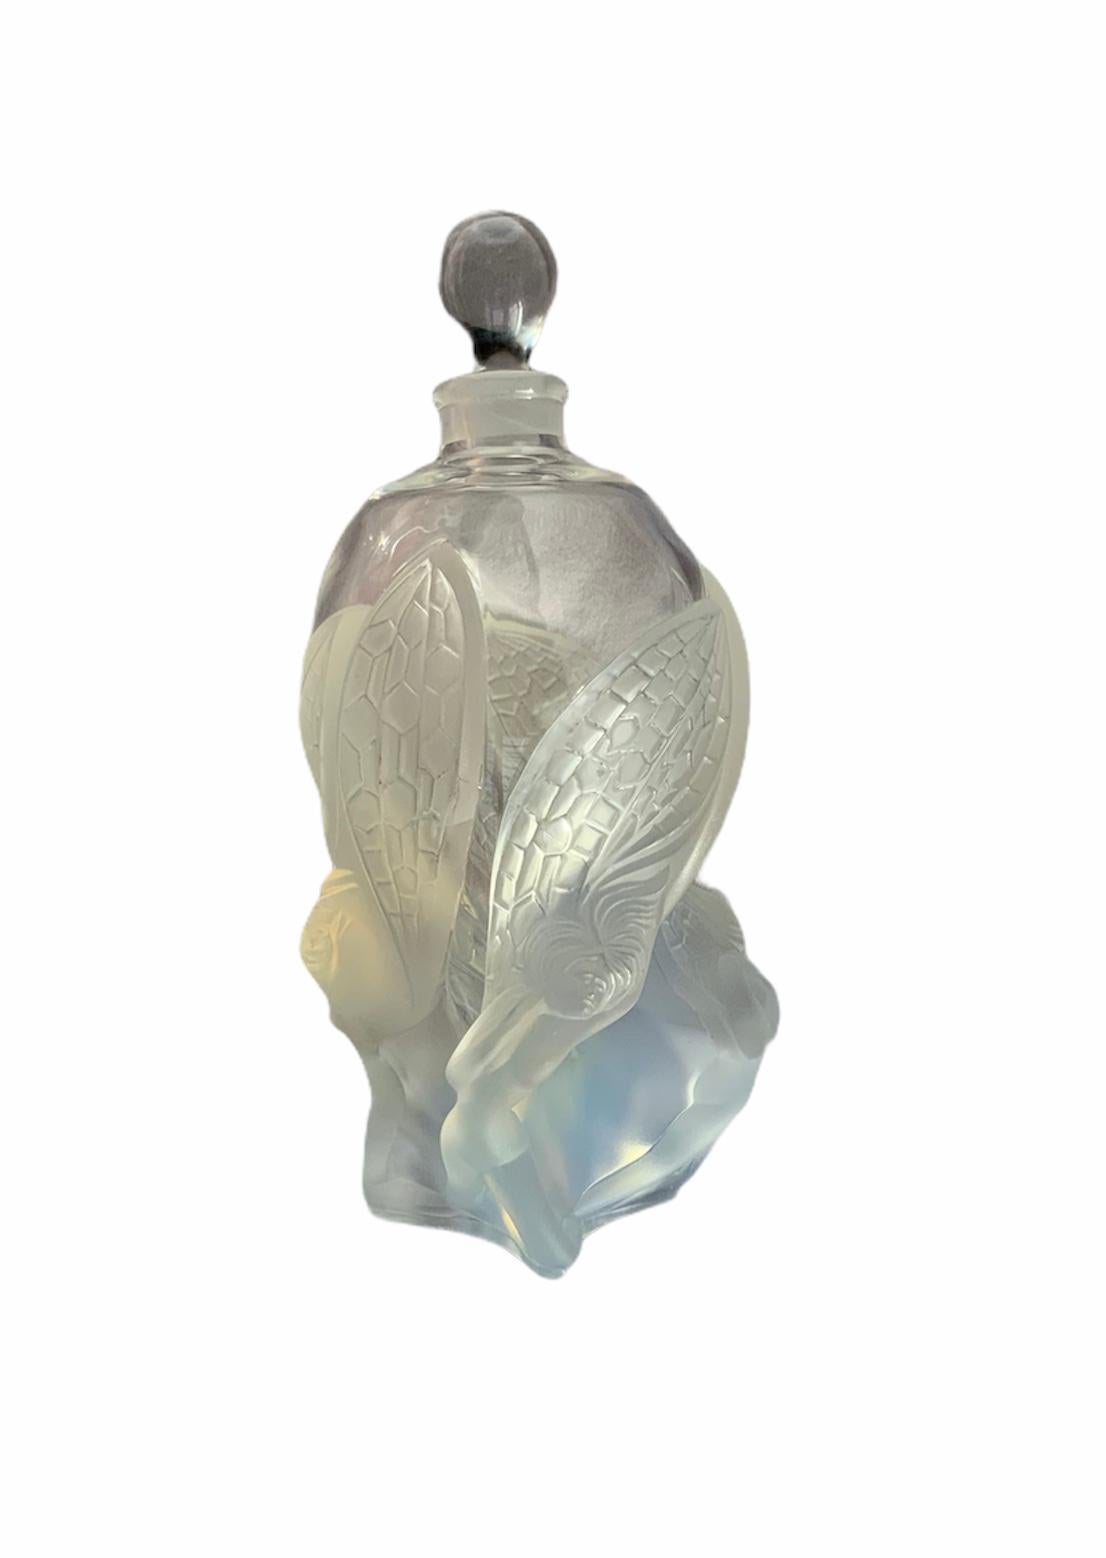 This is a rare Lalique crystal Les Elfes perfume Factice bottle. It depicts an urn shaped clear bottled adorned at the bottom with some embraced opalescent large winged fairies made of frosted glass. The stopper is shaped as an up side down tear